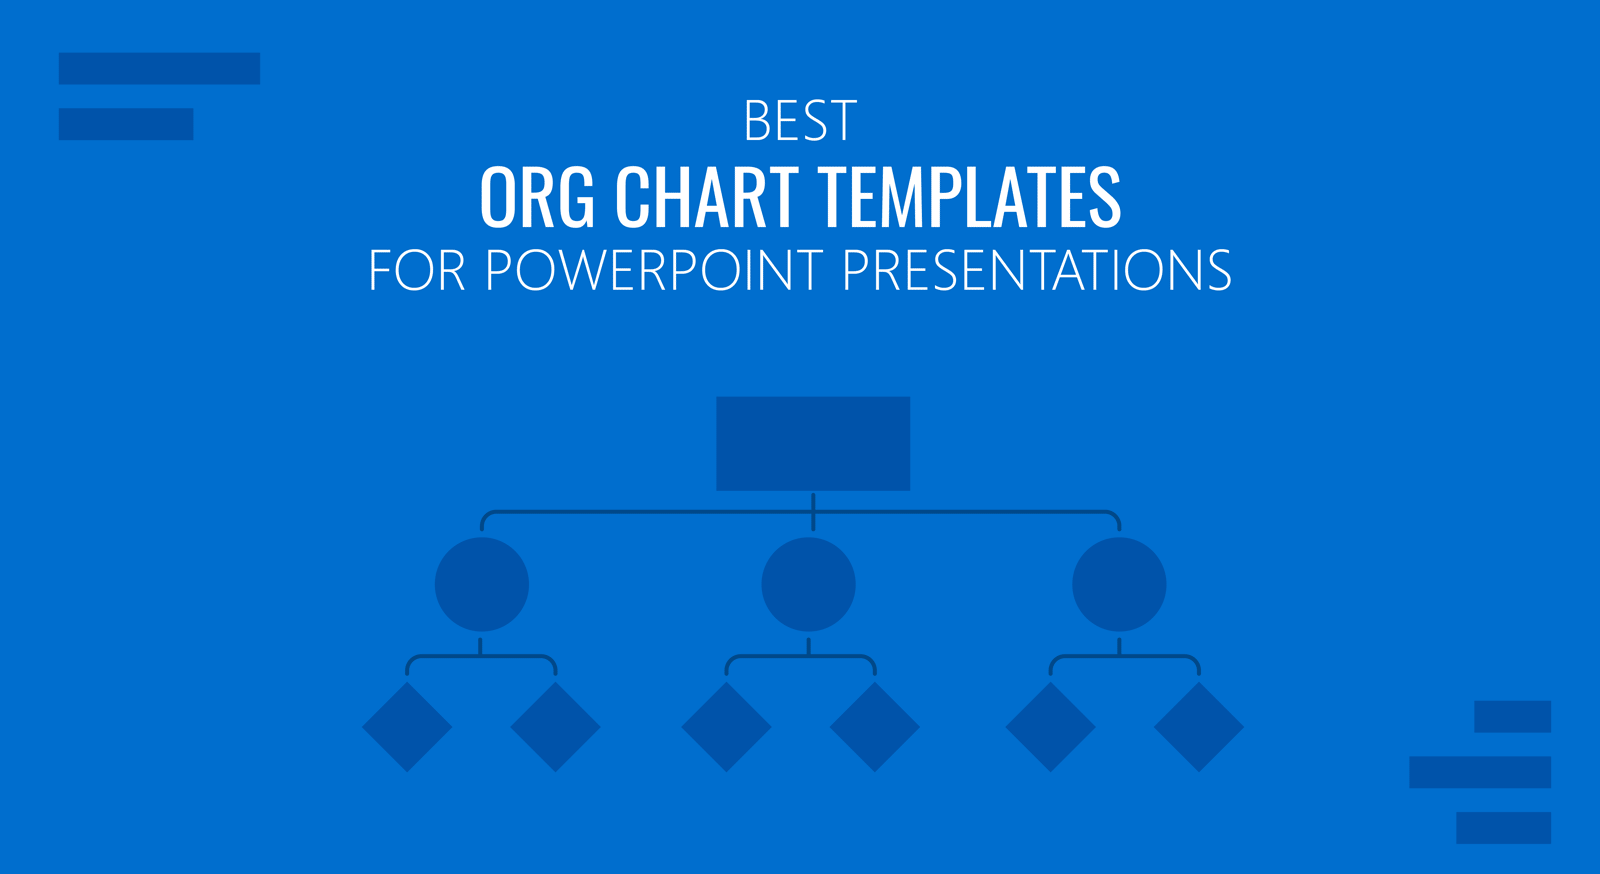 12 Best Org Chart Templates for PowerPoint Presentations